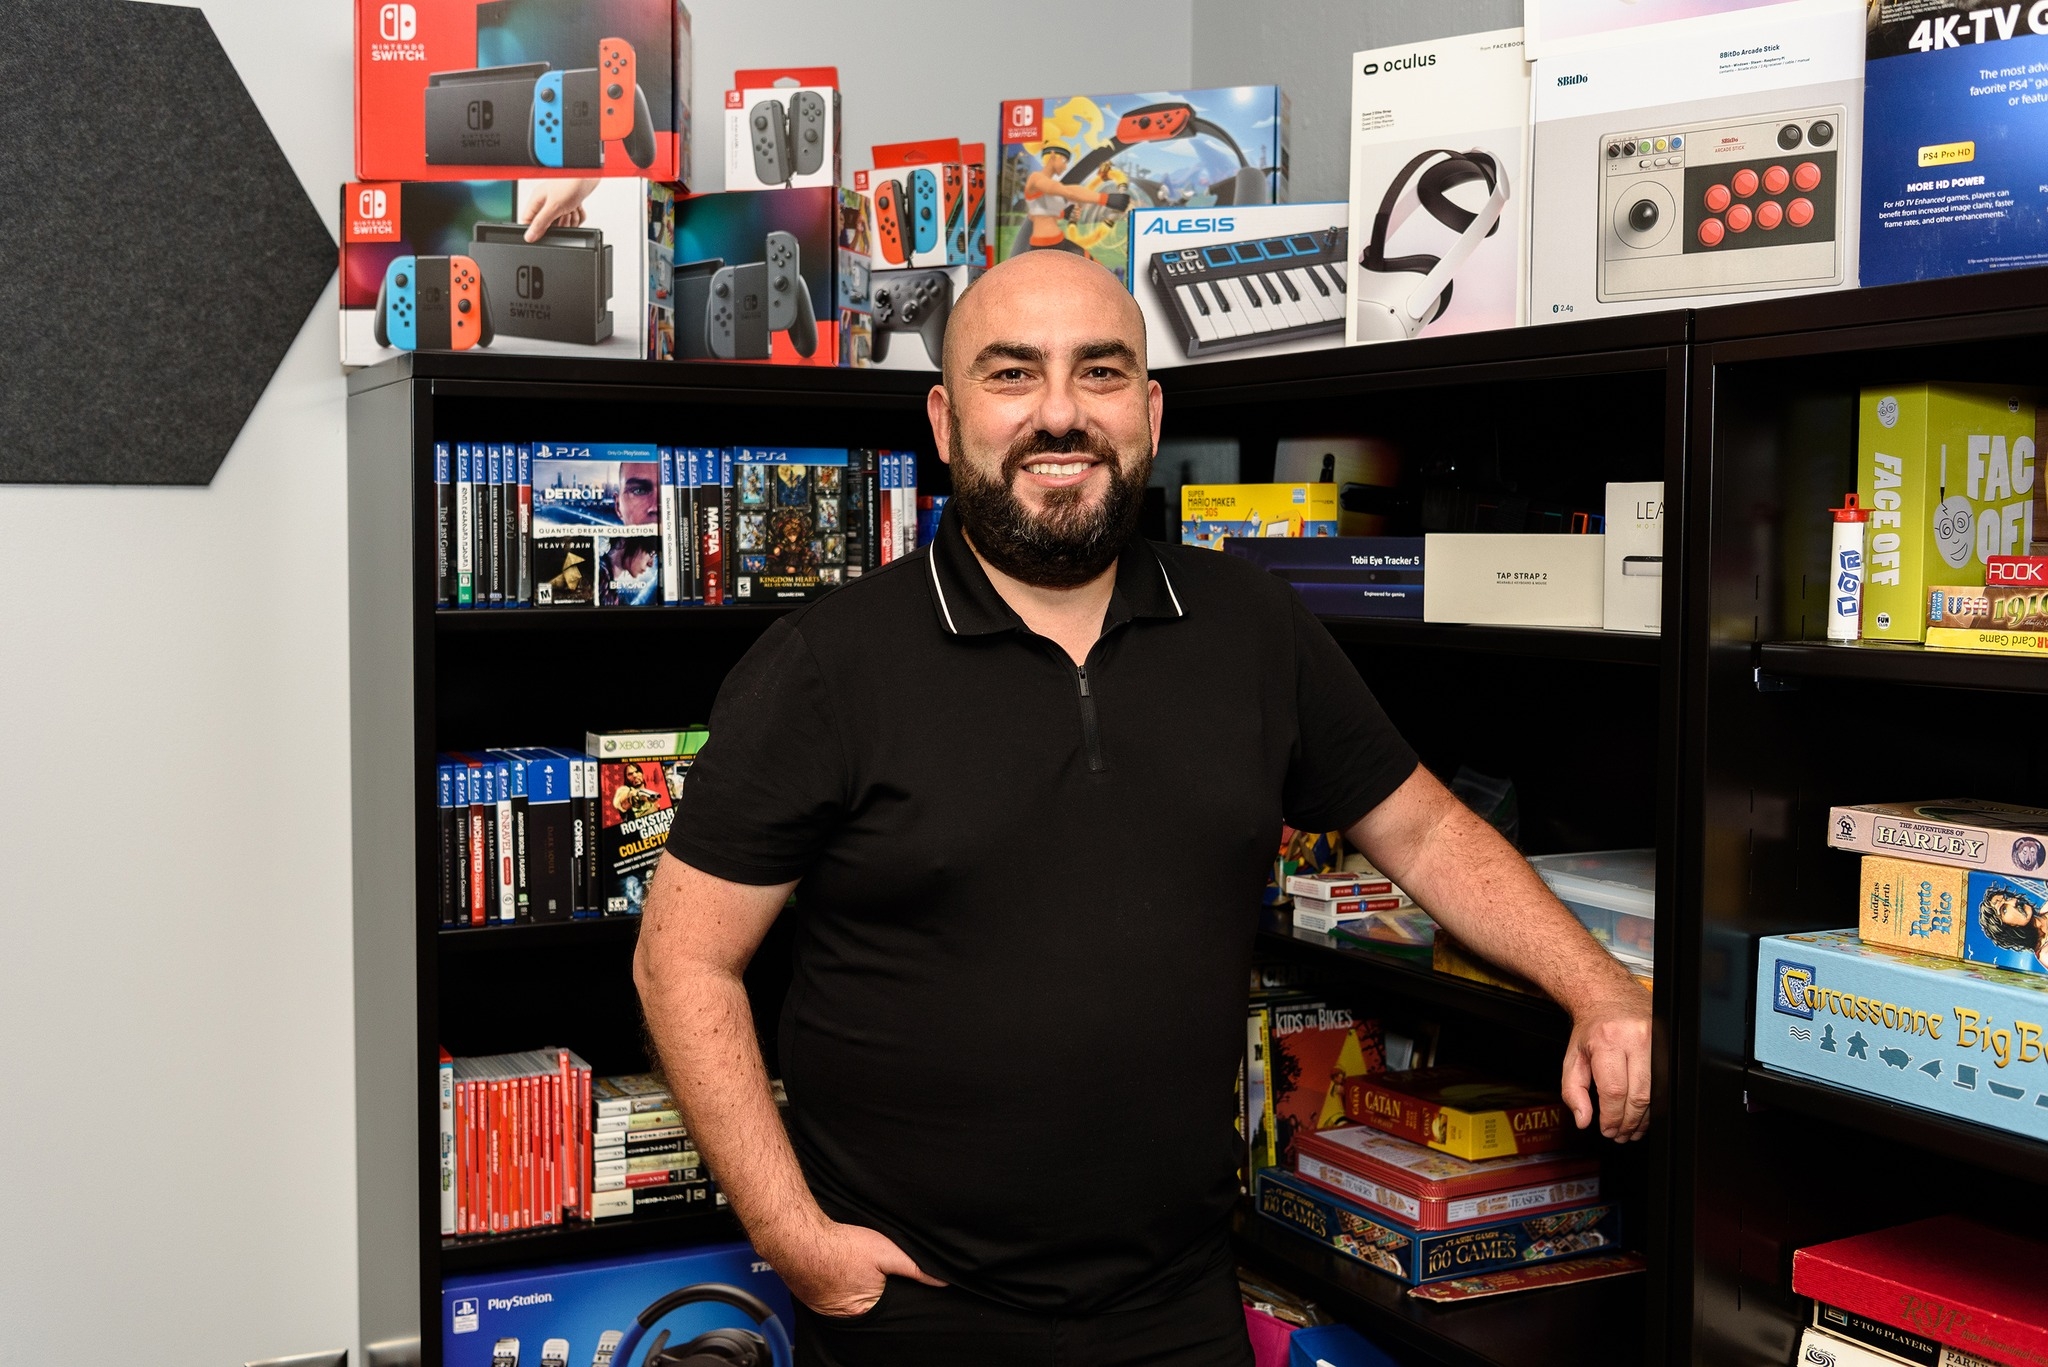 Dr. Şengün in front of a library of board and digital games and game consoles.